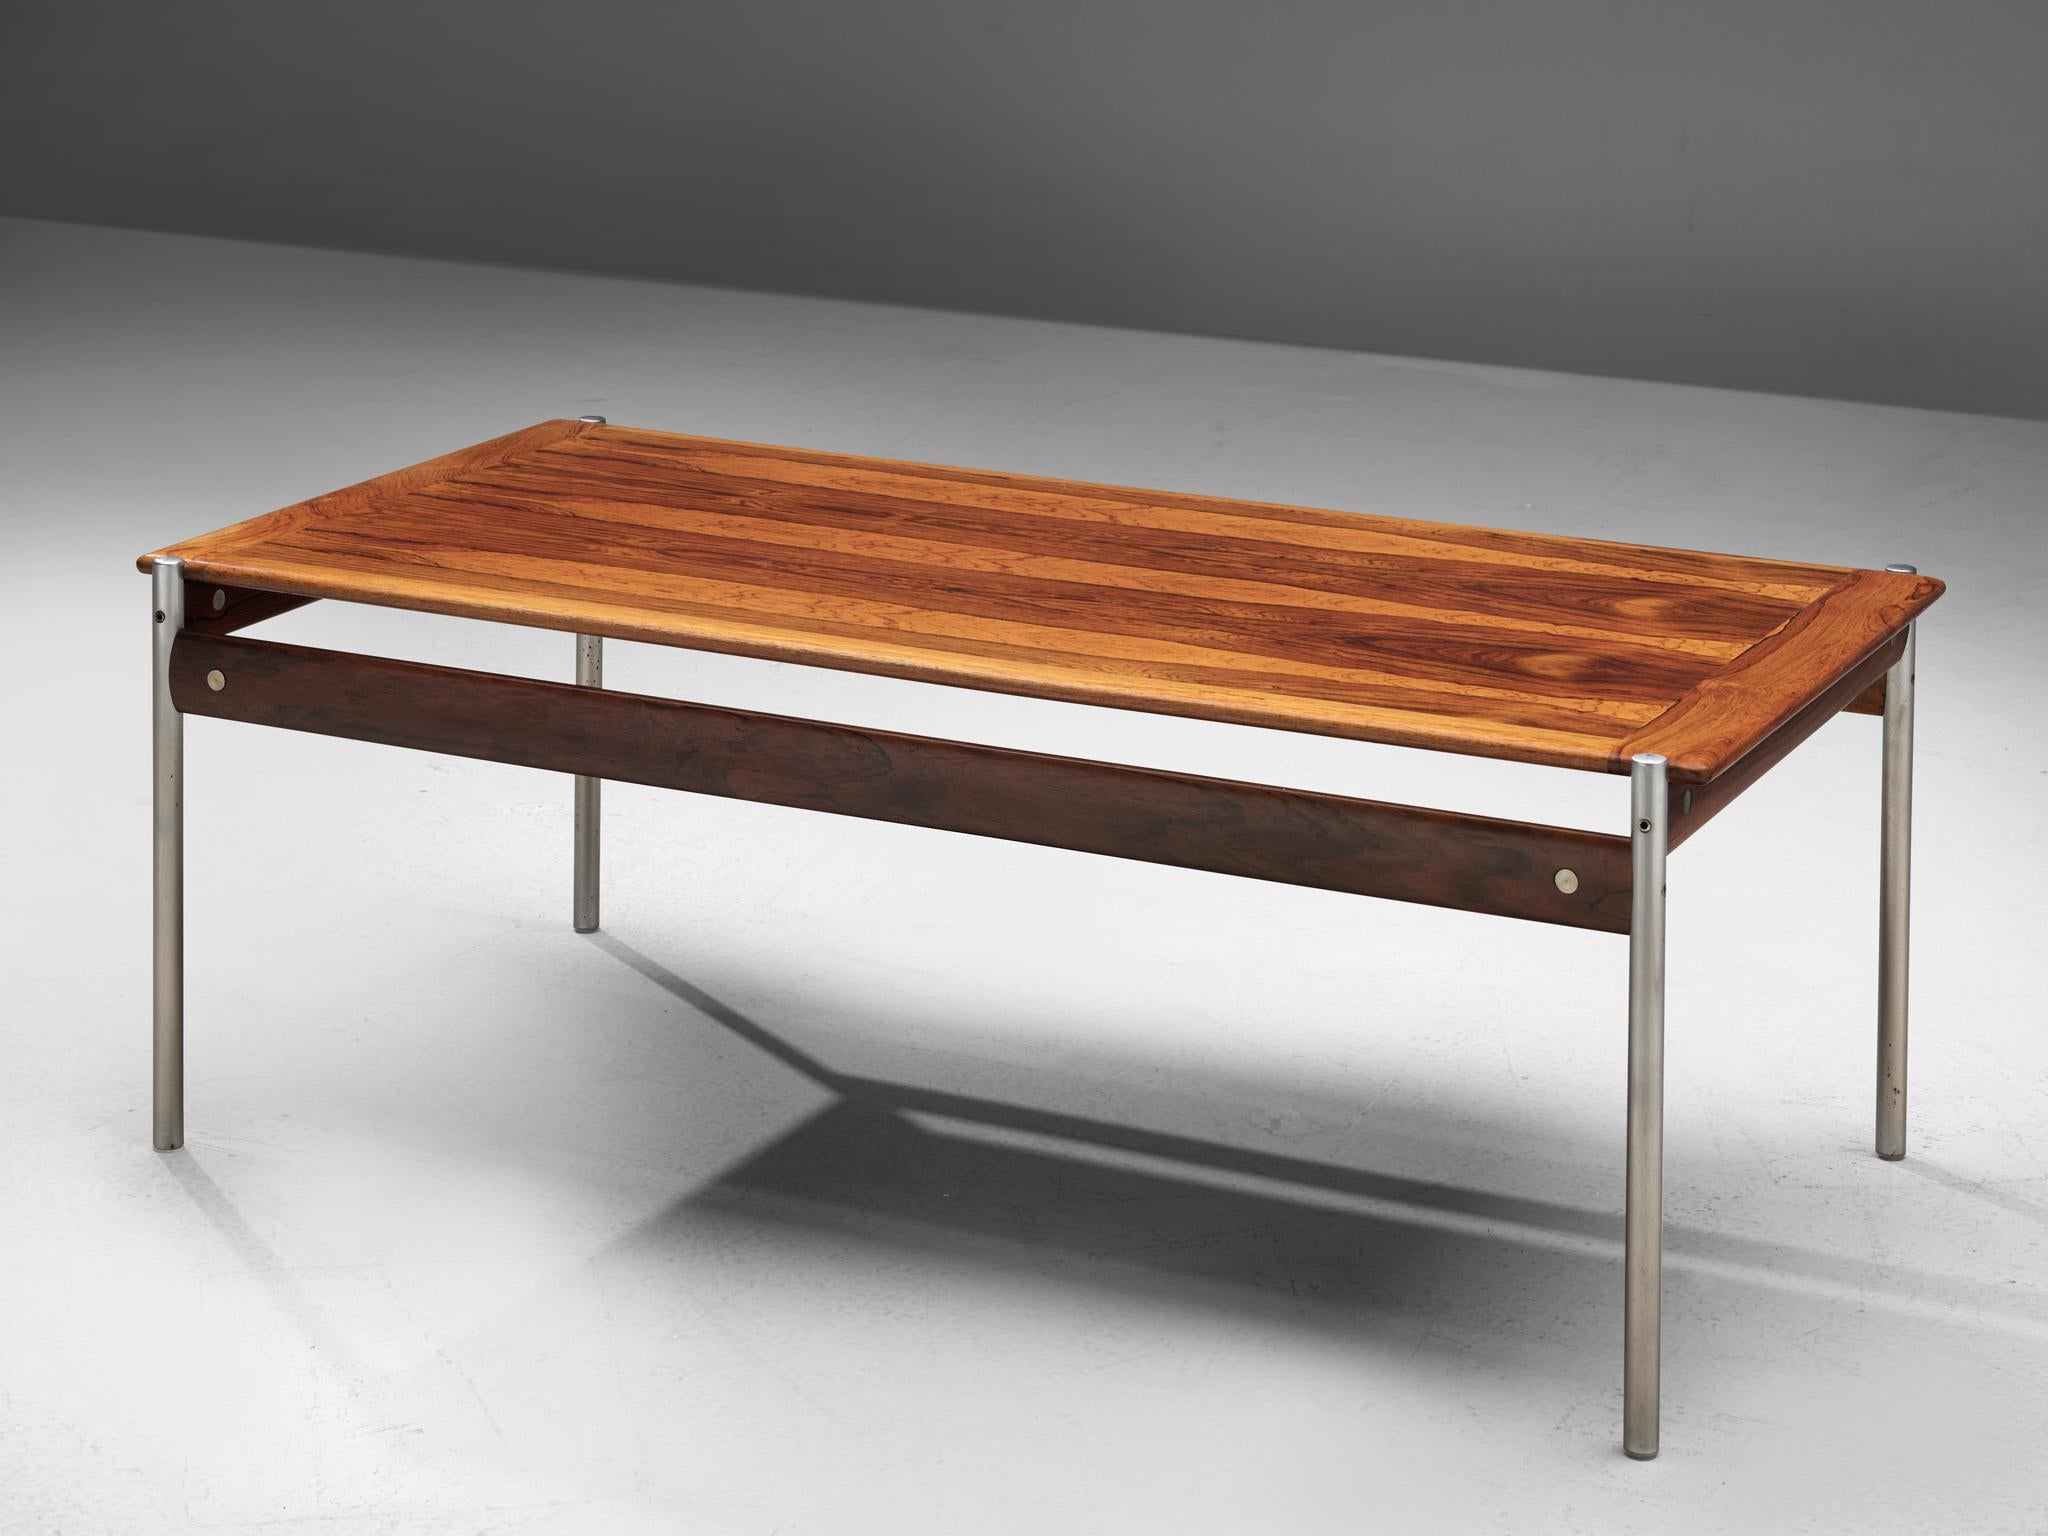 Sven Ivar Dysthe for Dokka Mobler, cocktail table model 1001, rosewood and steel, Norway, 1959.

Stately coffee table executed in high quality rosewood and with tubular steel legs. The table is designed by Sven Ivar Dysthe, being part of his 1001